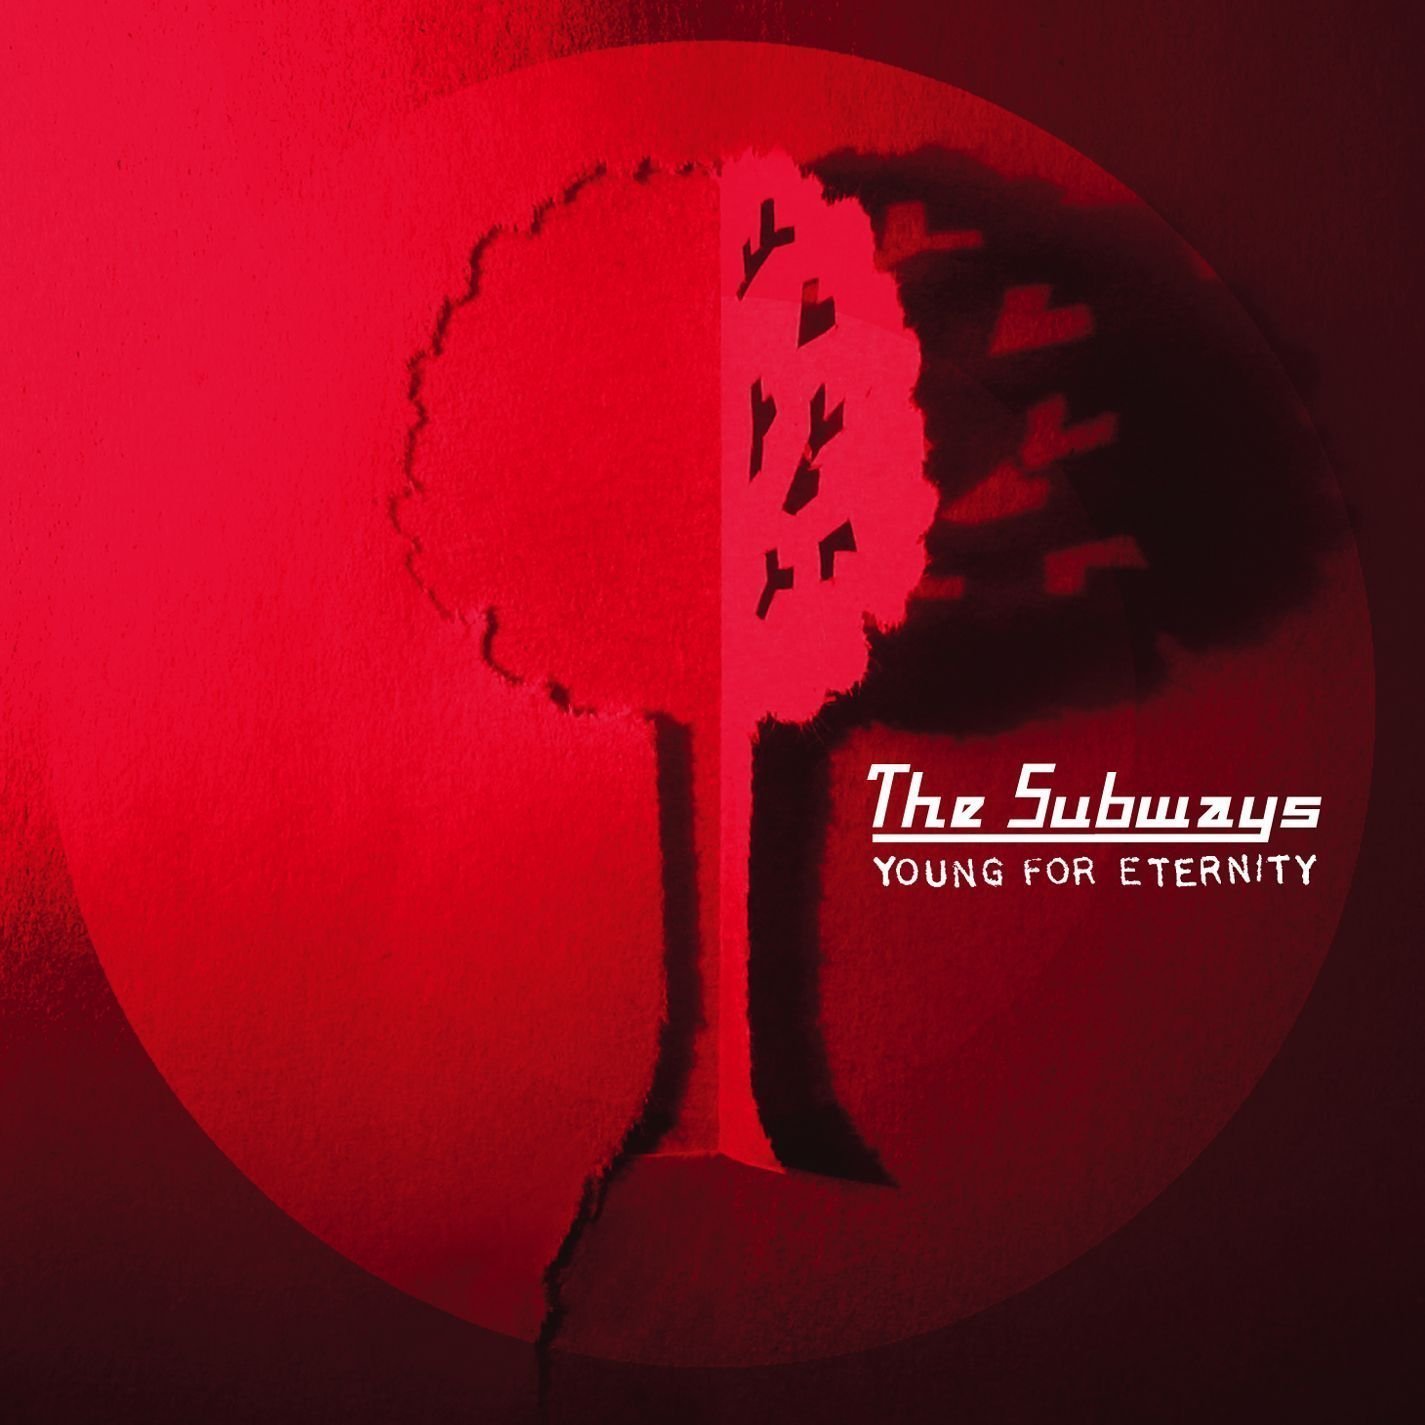 The Subways - Young For Eternity (LP) The Subways